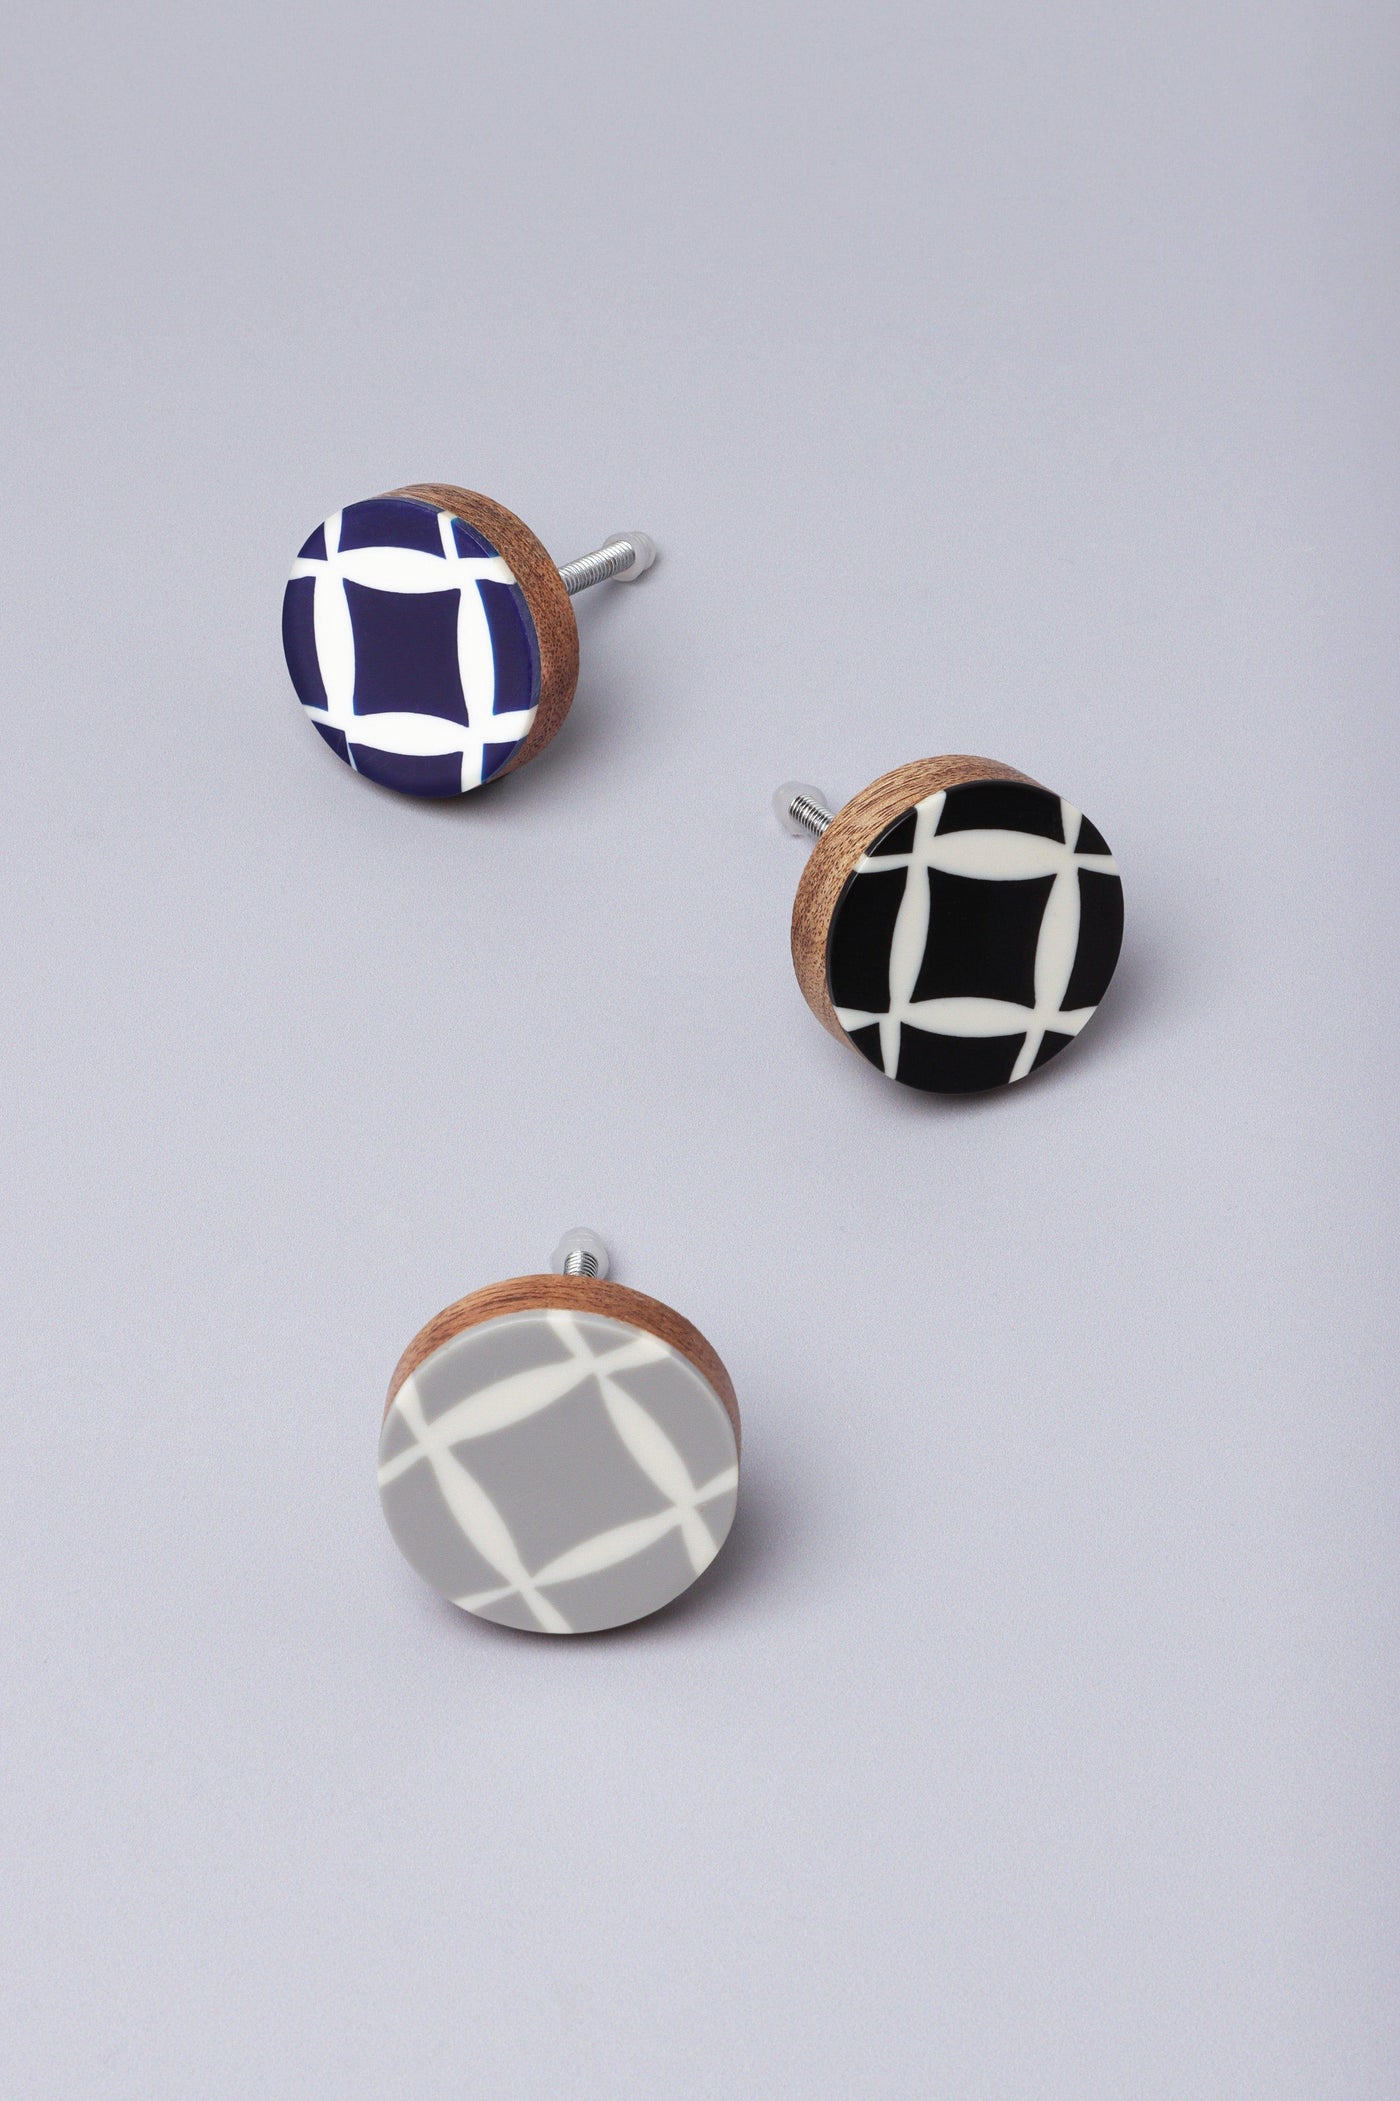 Gdecorstore Door Knobs & Handles Dizzy Chequered Resin And Wood Handles Knobs